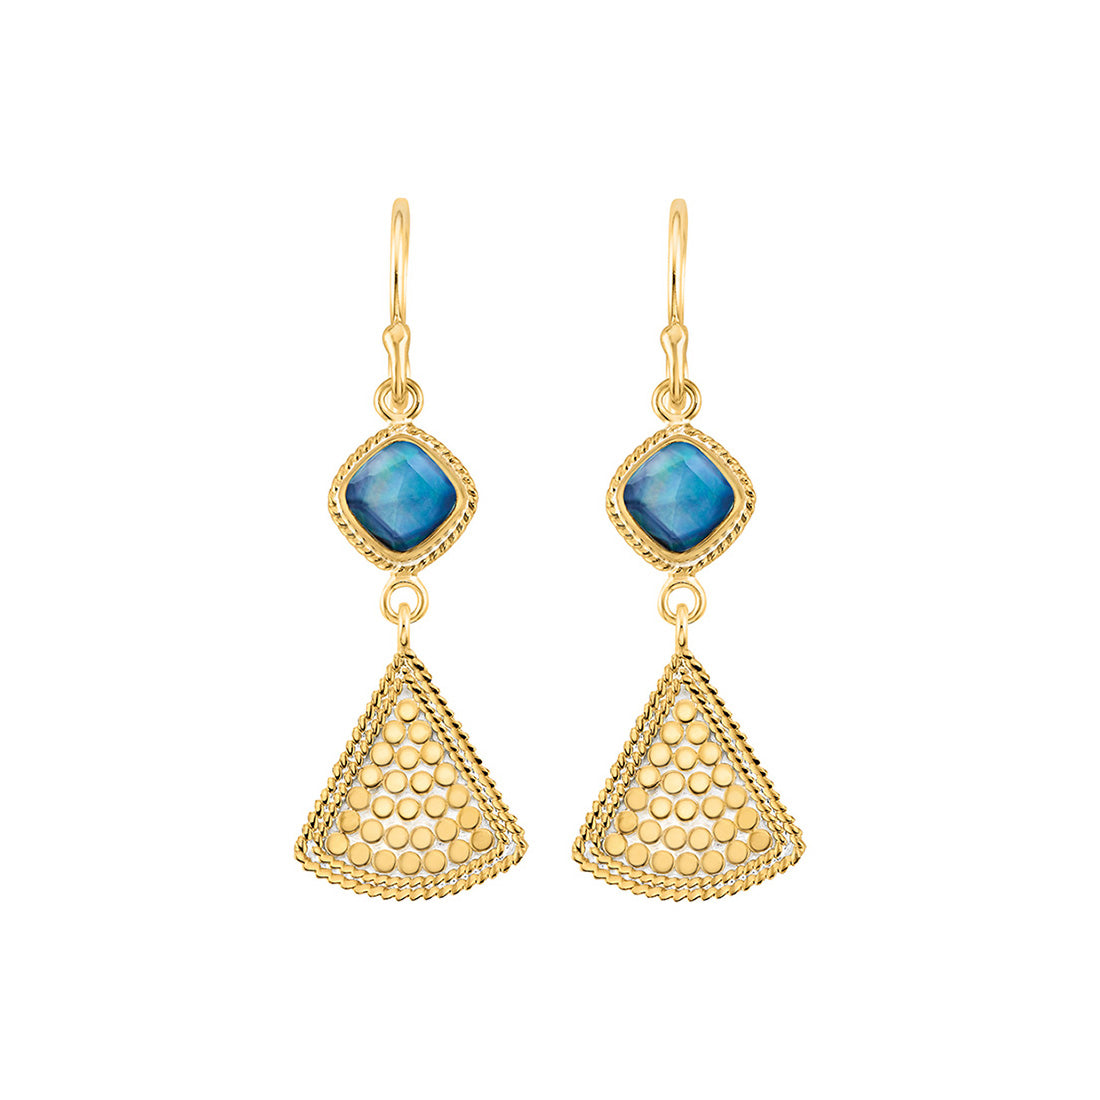 Ana Beck 18k gold plated and sterling silver Lapis Double Drop Earrings - Gold